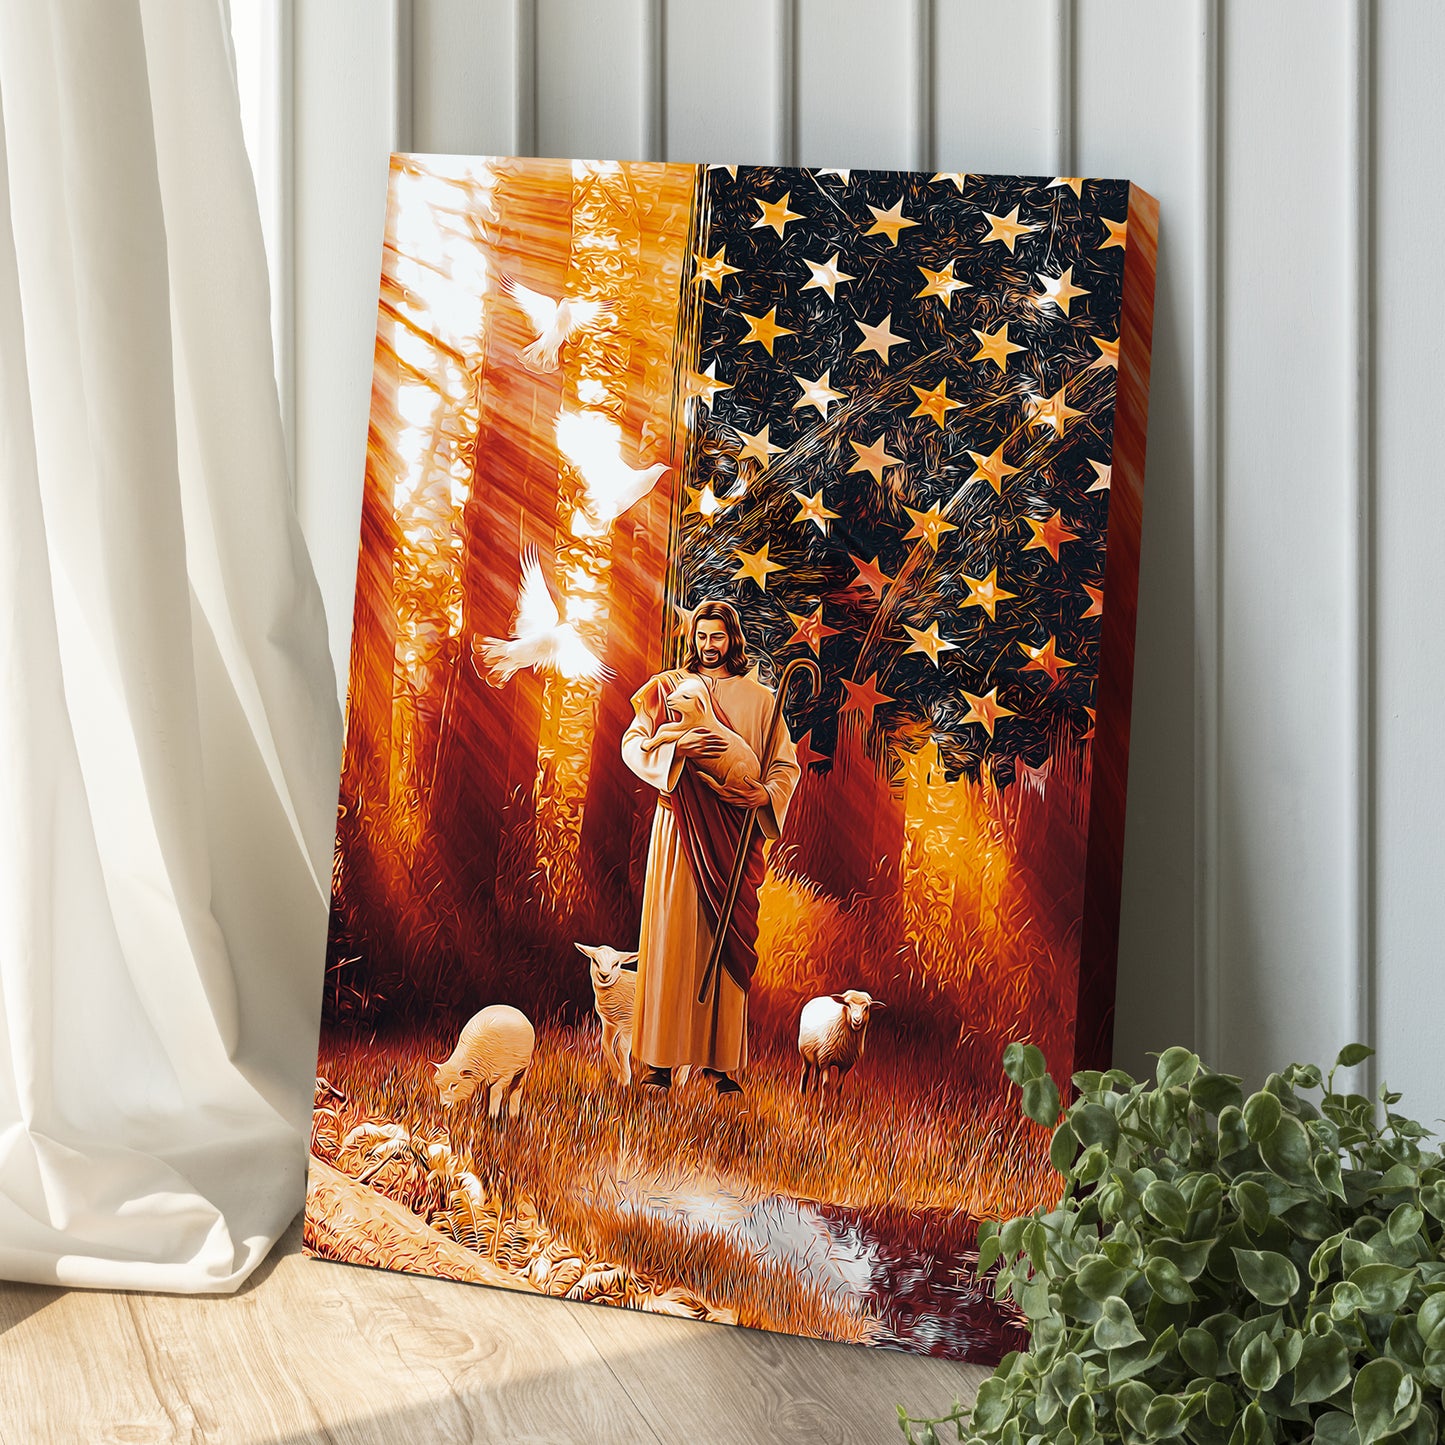 Jesus walking with lambs (READY TO HANG) - Wall Art Image by Tailored Canvases